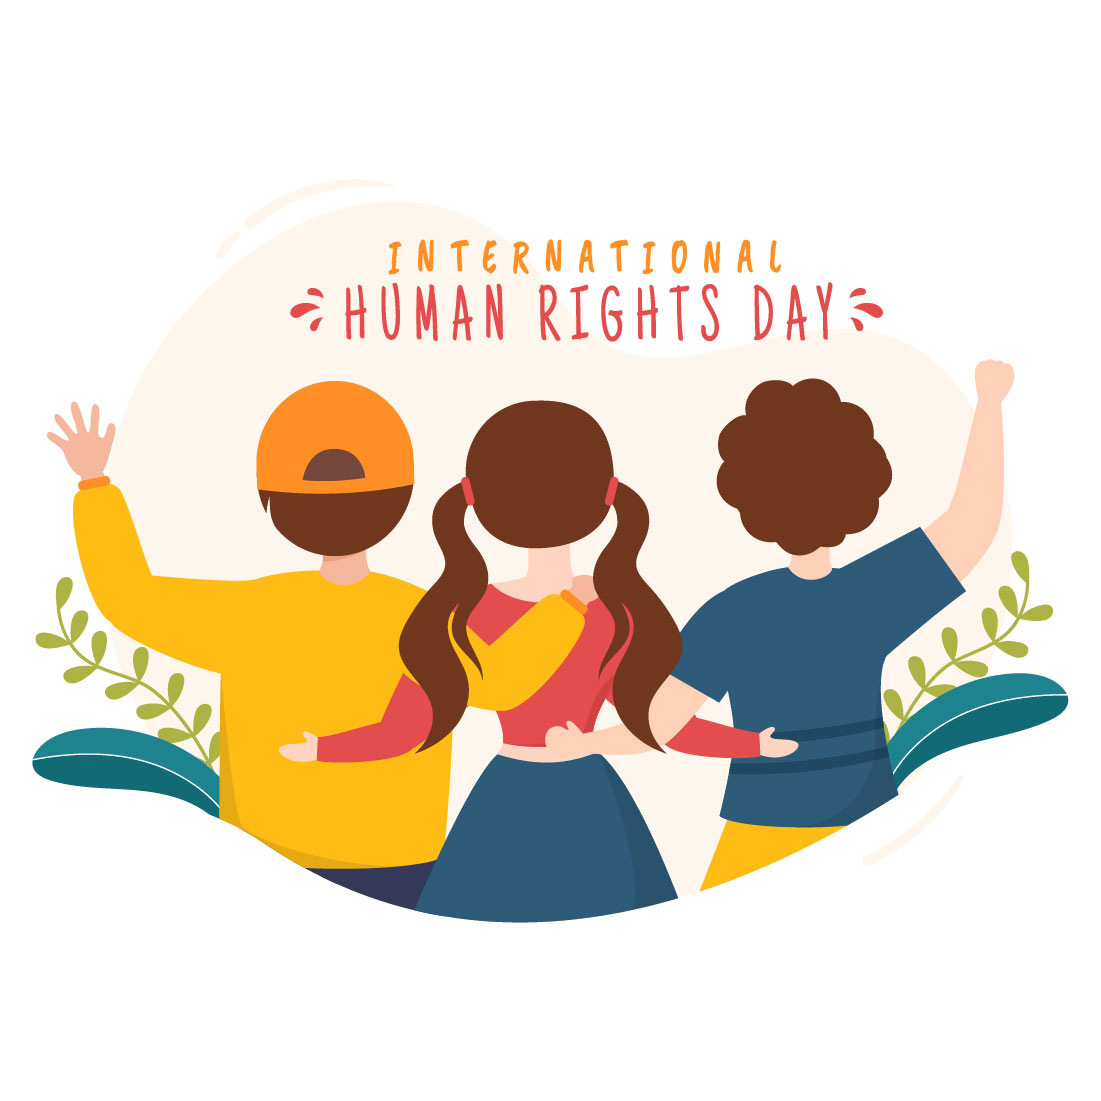 12 Human Rights Day Illustration Preview Image.